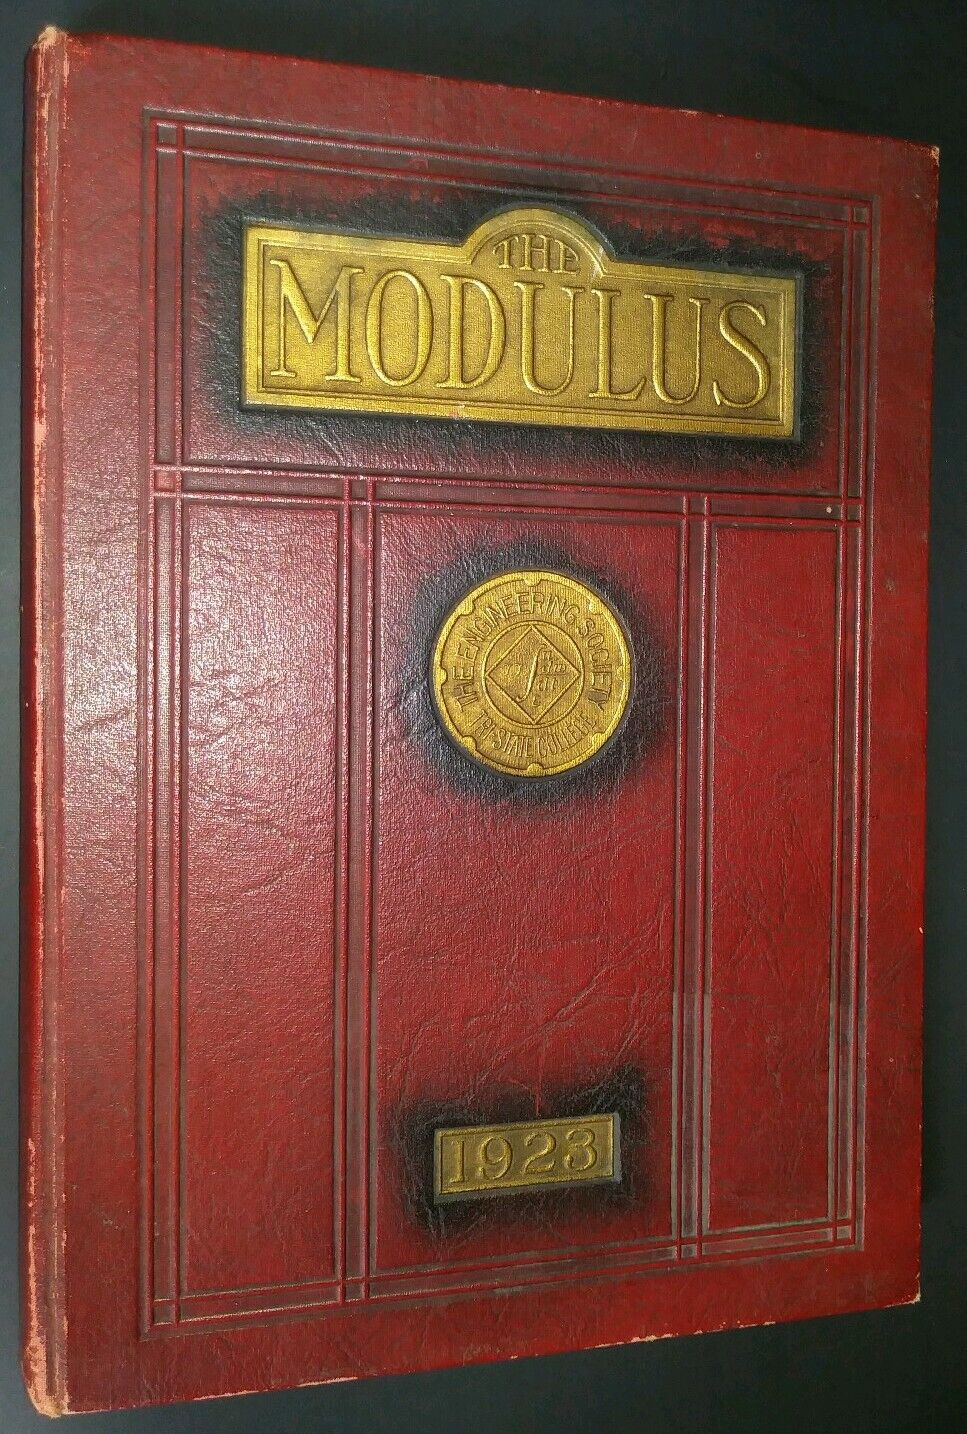 The Modulus Engineering Society Tri-State College Trine University Yearbook 1923